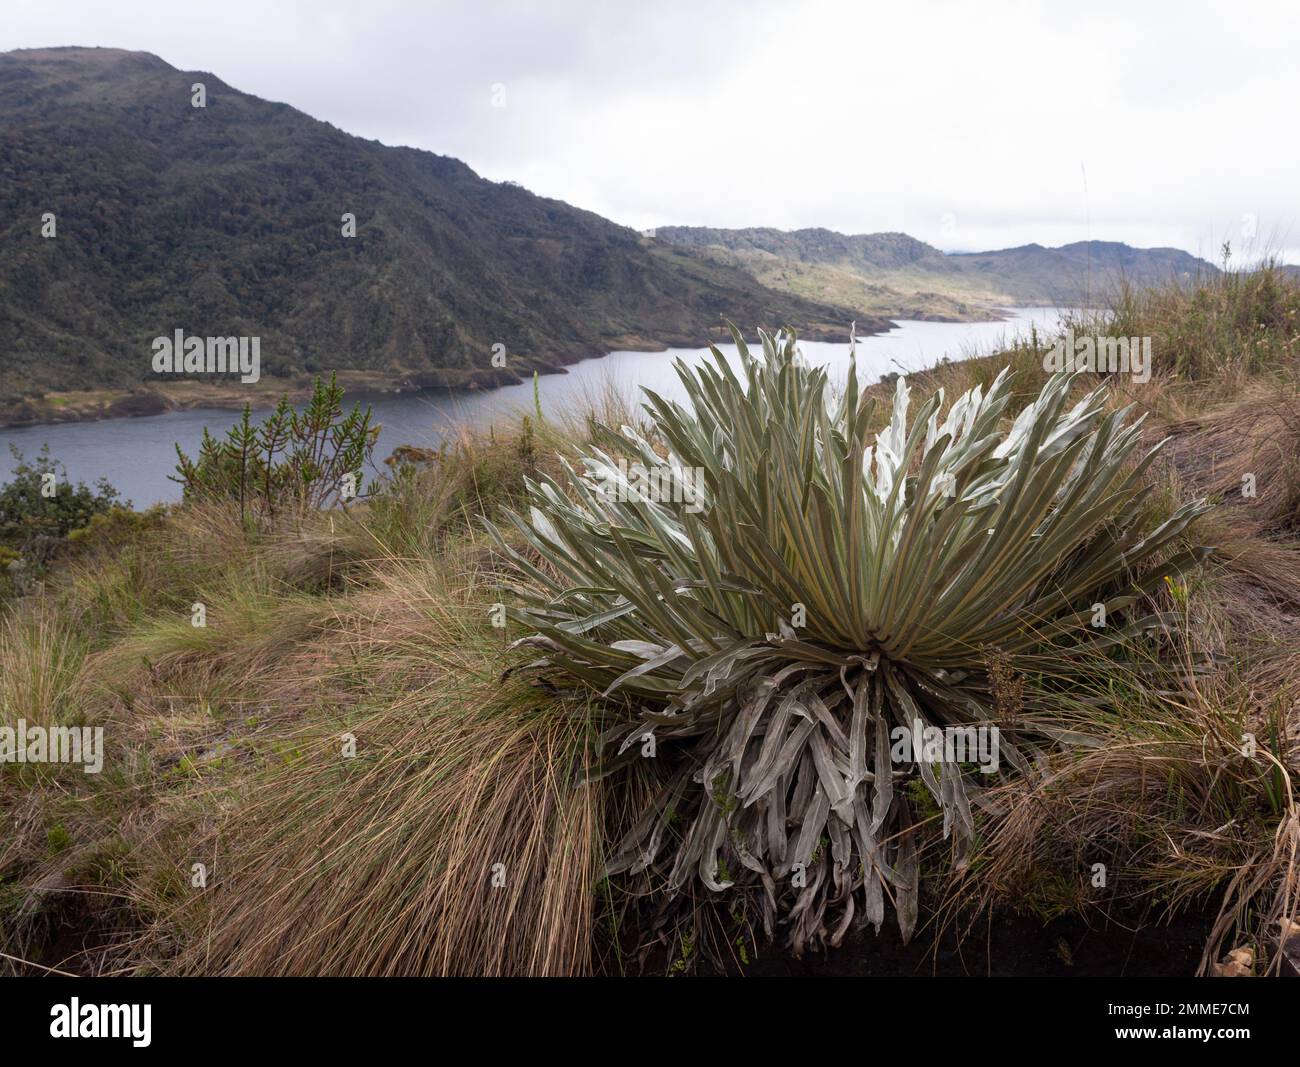 CHINGAZA, COLOMBIA - A frailejon plant with chuza reservoir lake and andean mountains at background landscape inside Chingaza National Natural Park Stock Photo